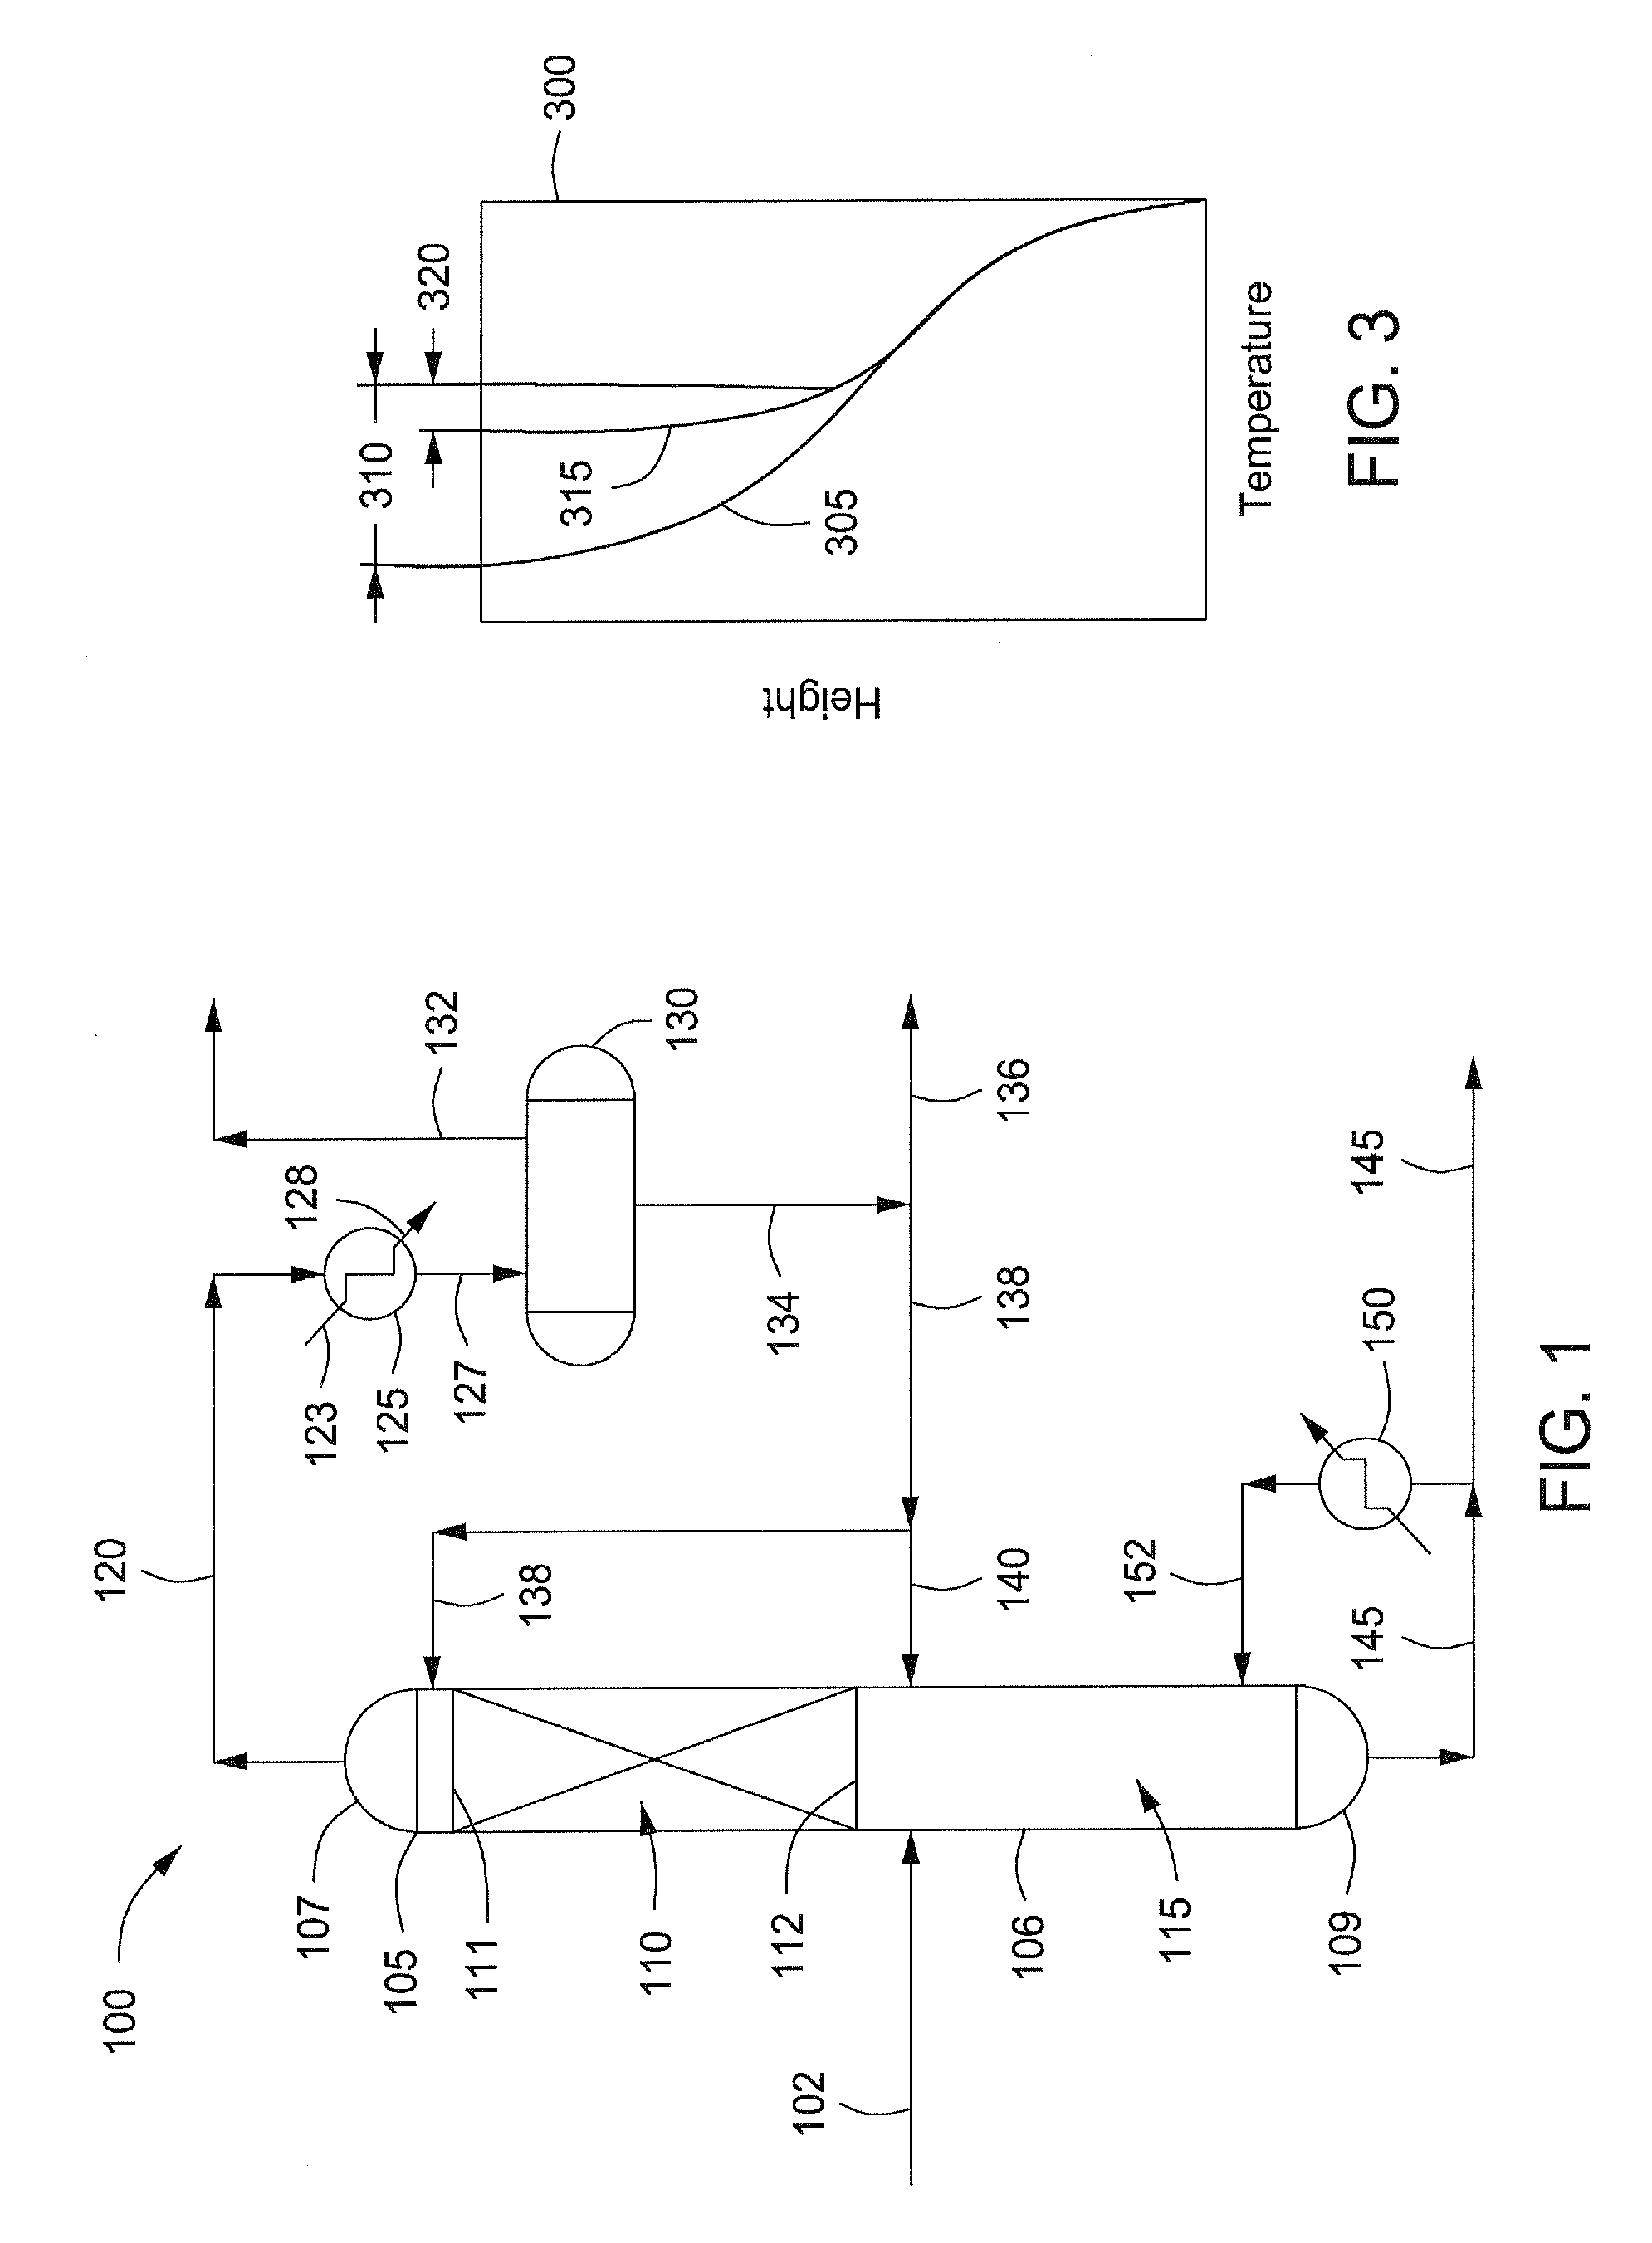 Systems and methods for reactive distillation with recirculation of light components